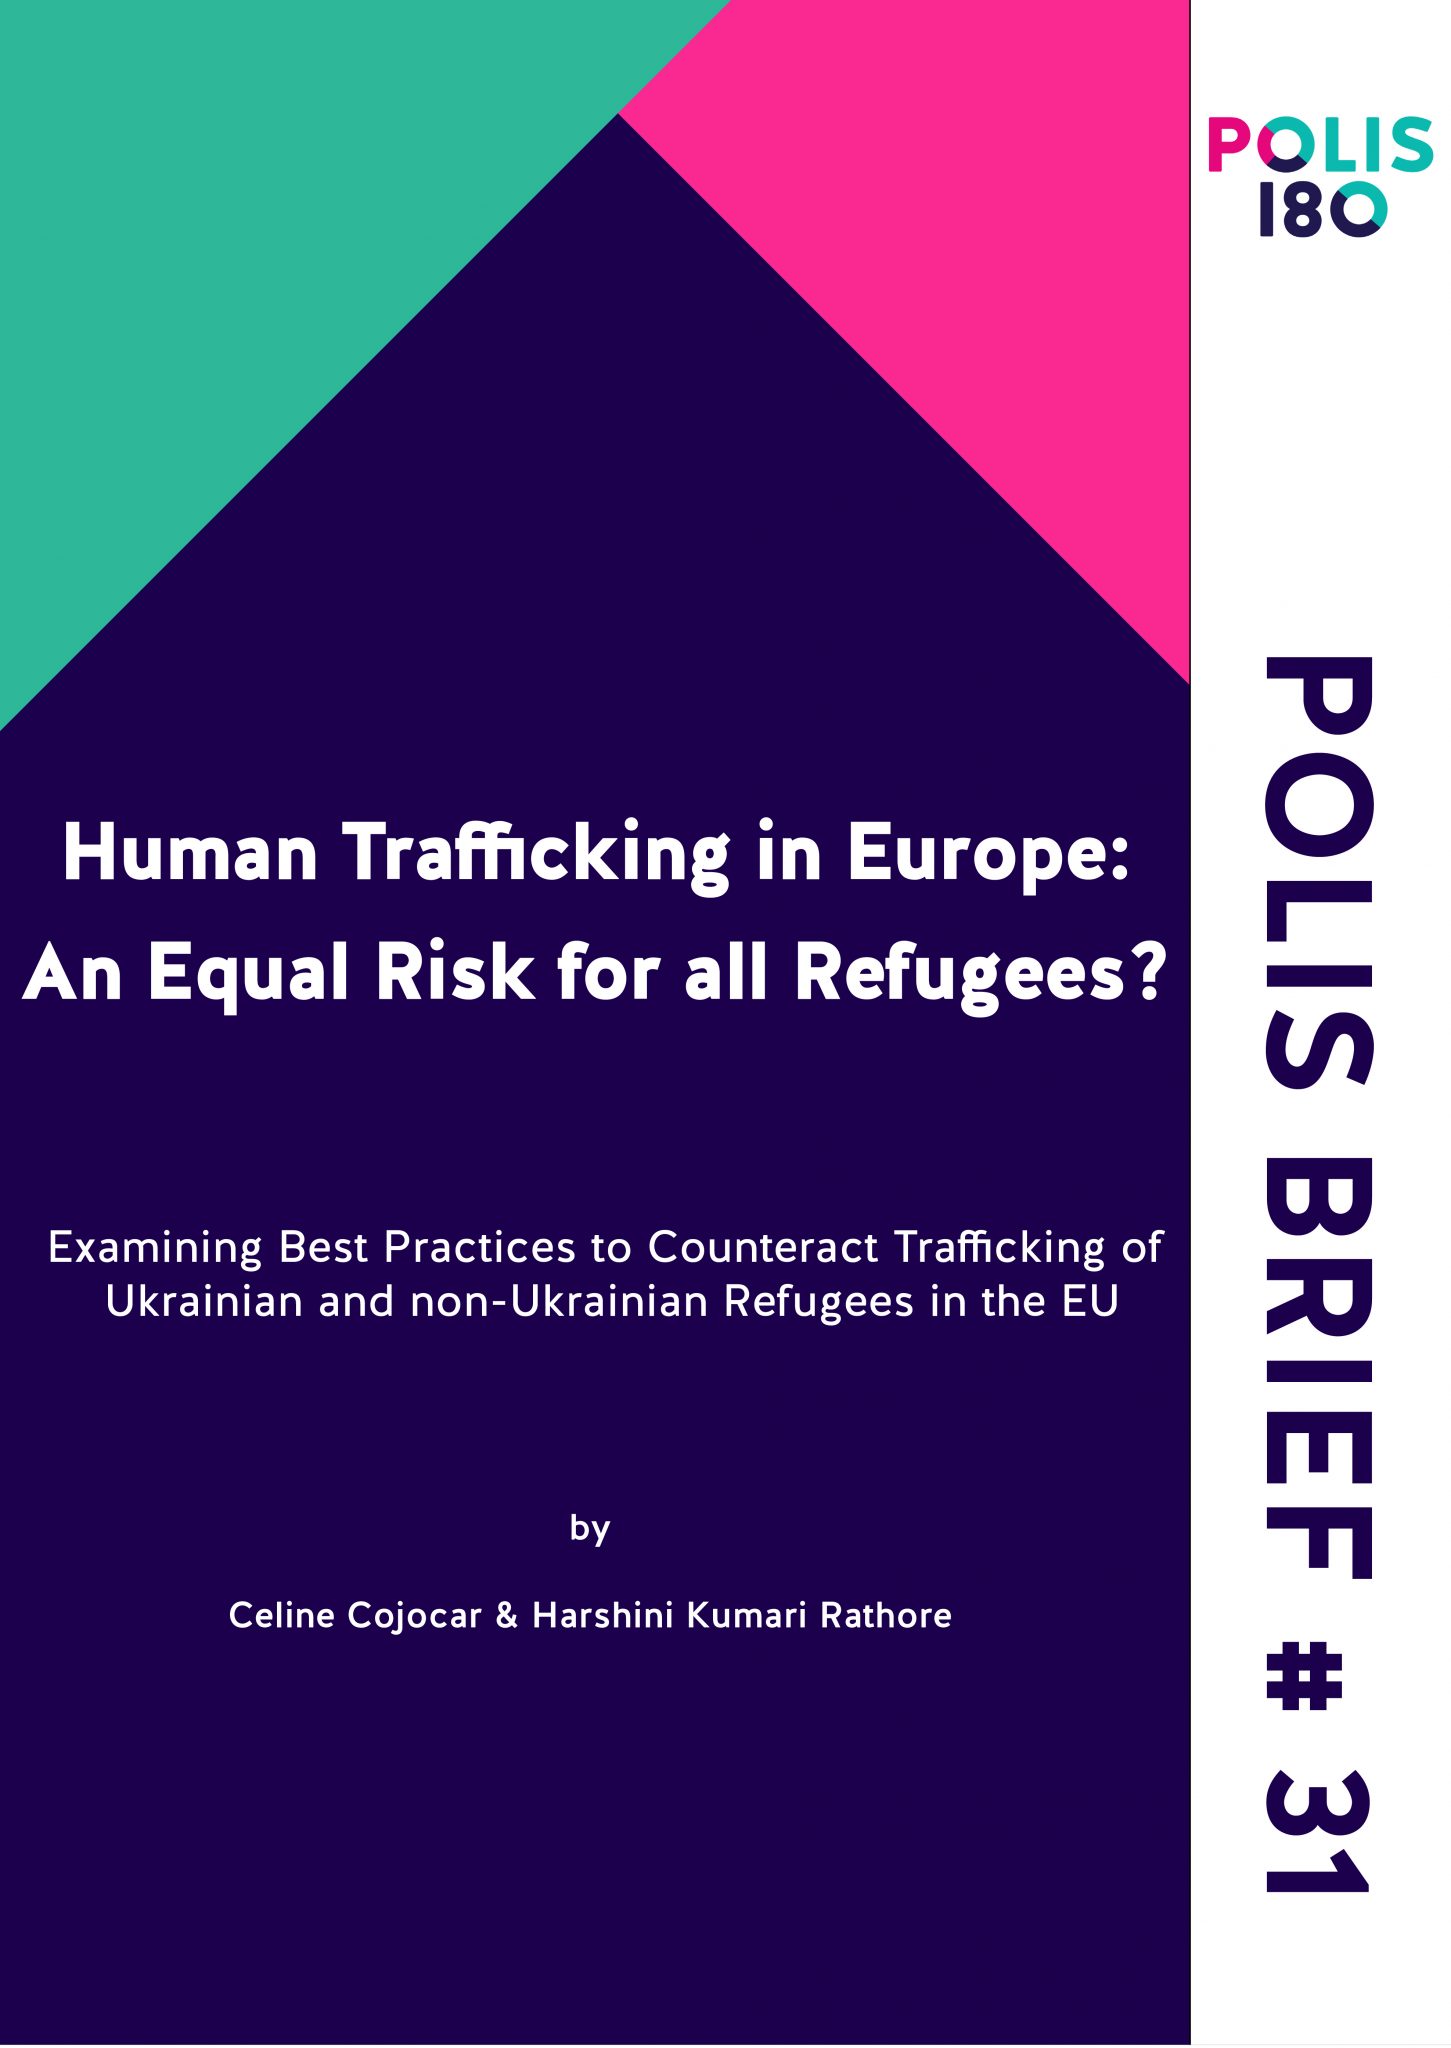 Polis Brief N° 31 - Human Trafficking in Europe: An Equal Risk for all Refugees?